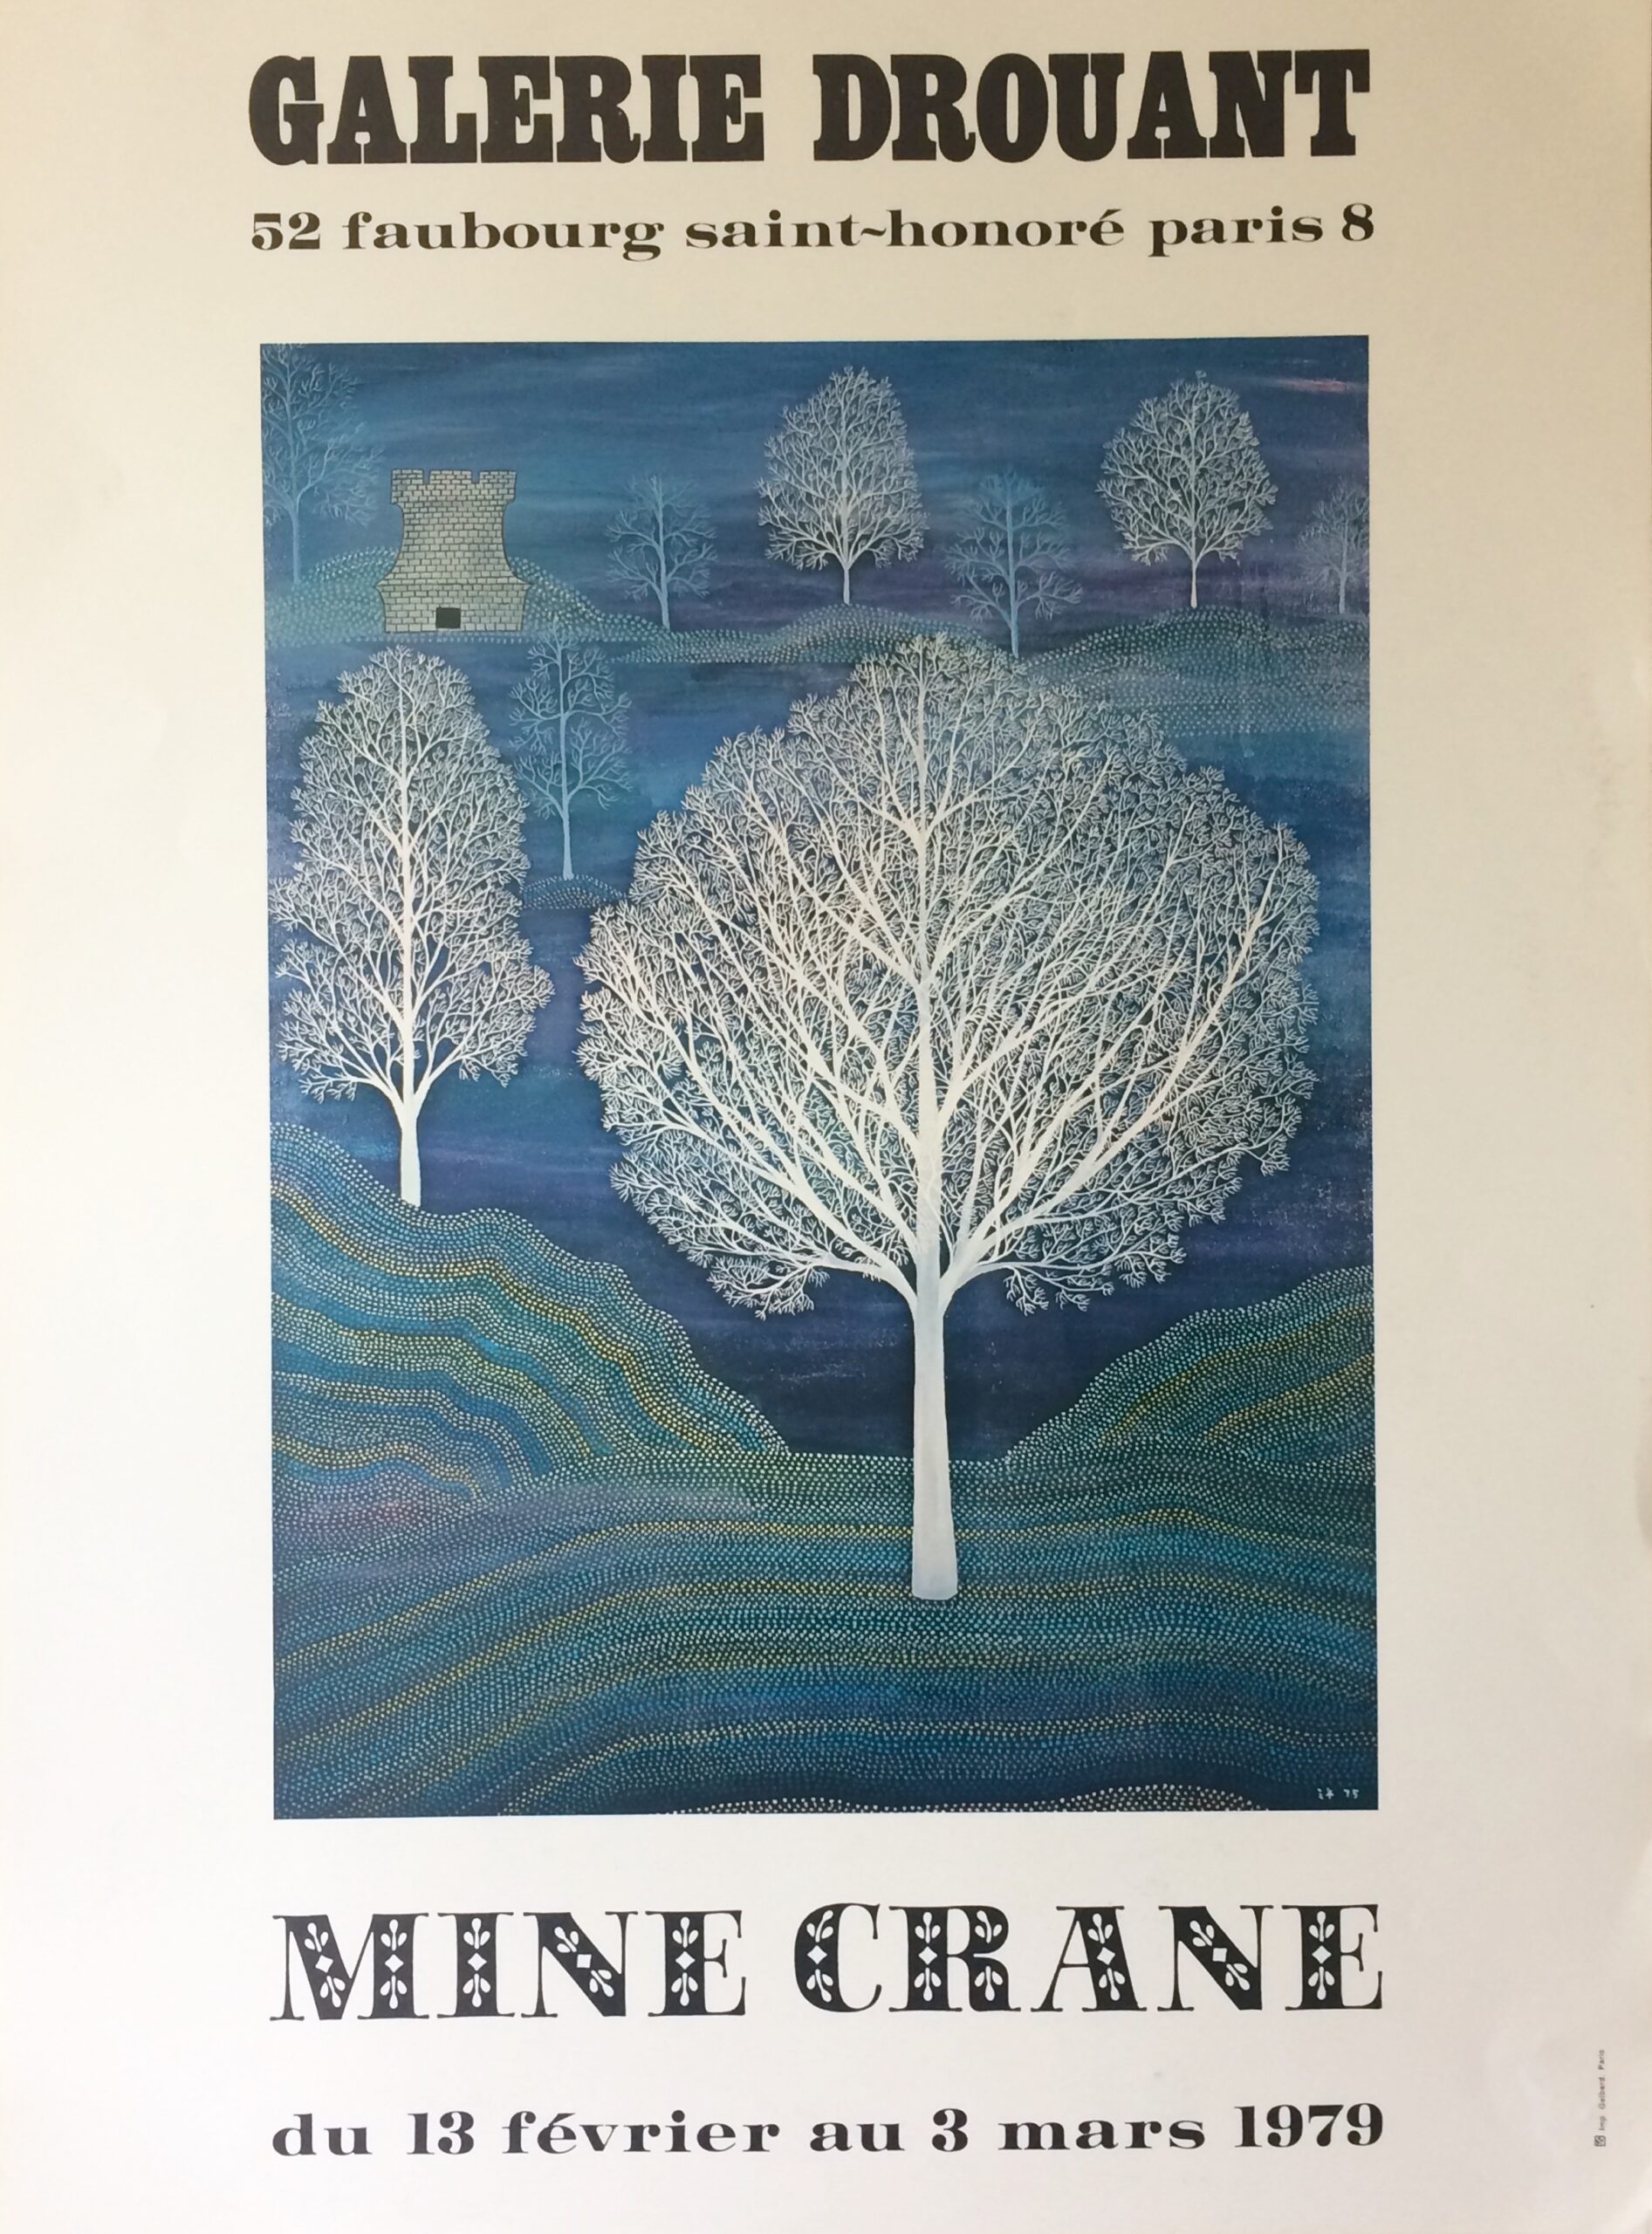 a poster in French from an art show in Paris, featuring the work of Mine Crane